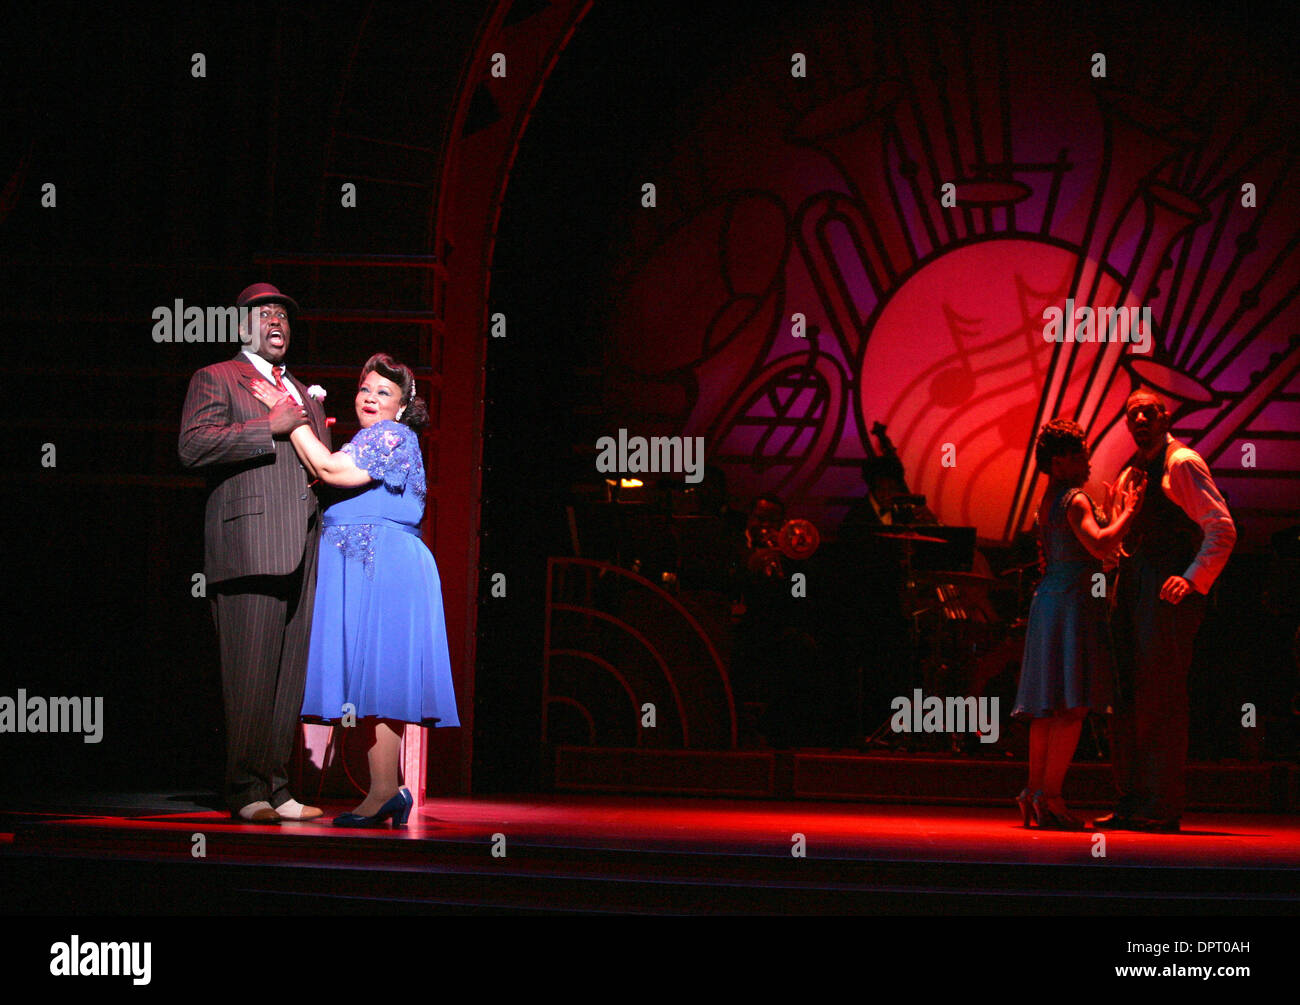 Apr 17, 2009 - Los Angeles, California, United States - Artists DOUG ESKEW and ARMELIA MCQUEEN perform on stage during a dress rehearsal for the musical show Ain't Misbeavin at the Ahmanson Theatre. (Credit Image: © Ringo Chiu/ZUMA Press) Stock Photo